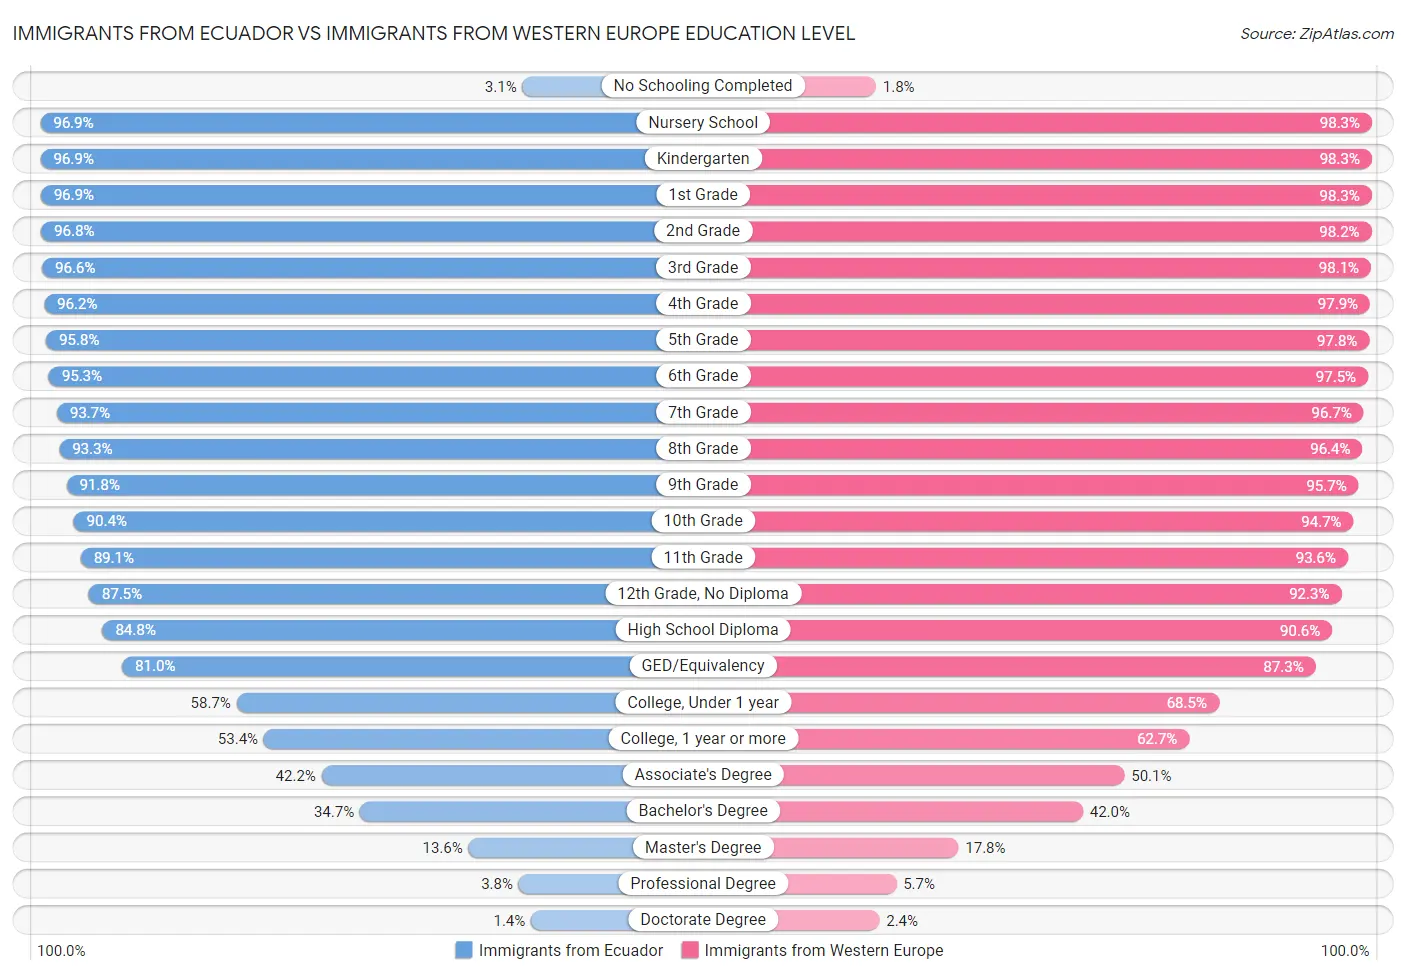 Immigrants from Ecuador vs Immigrants from Western Europe Education Level